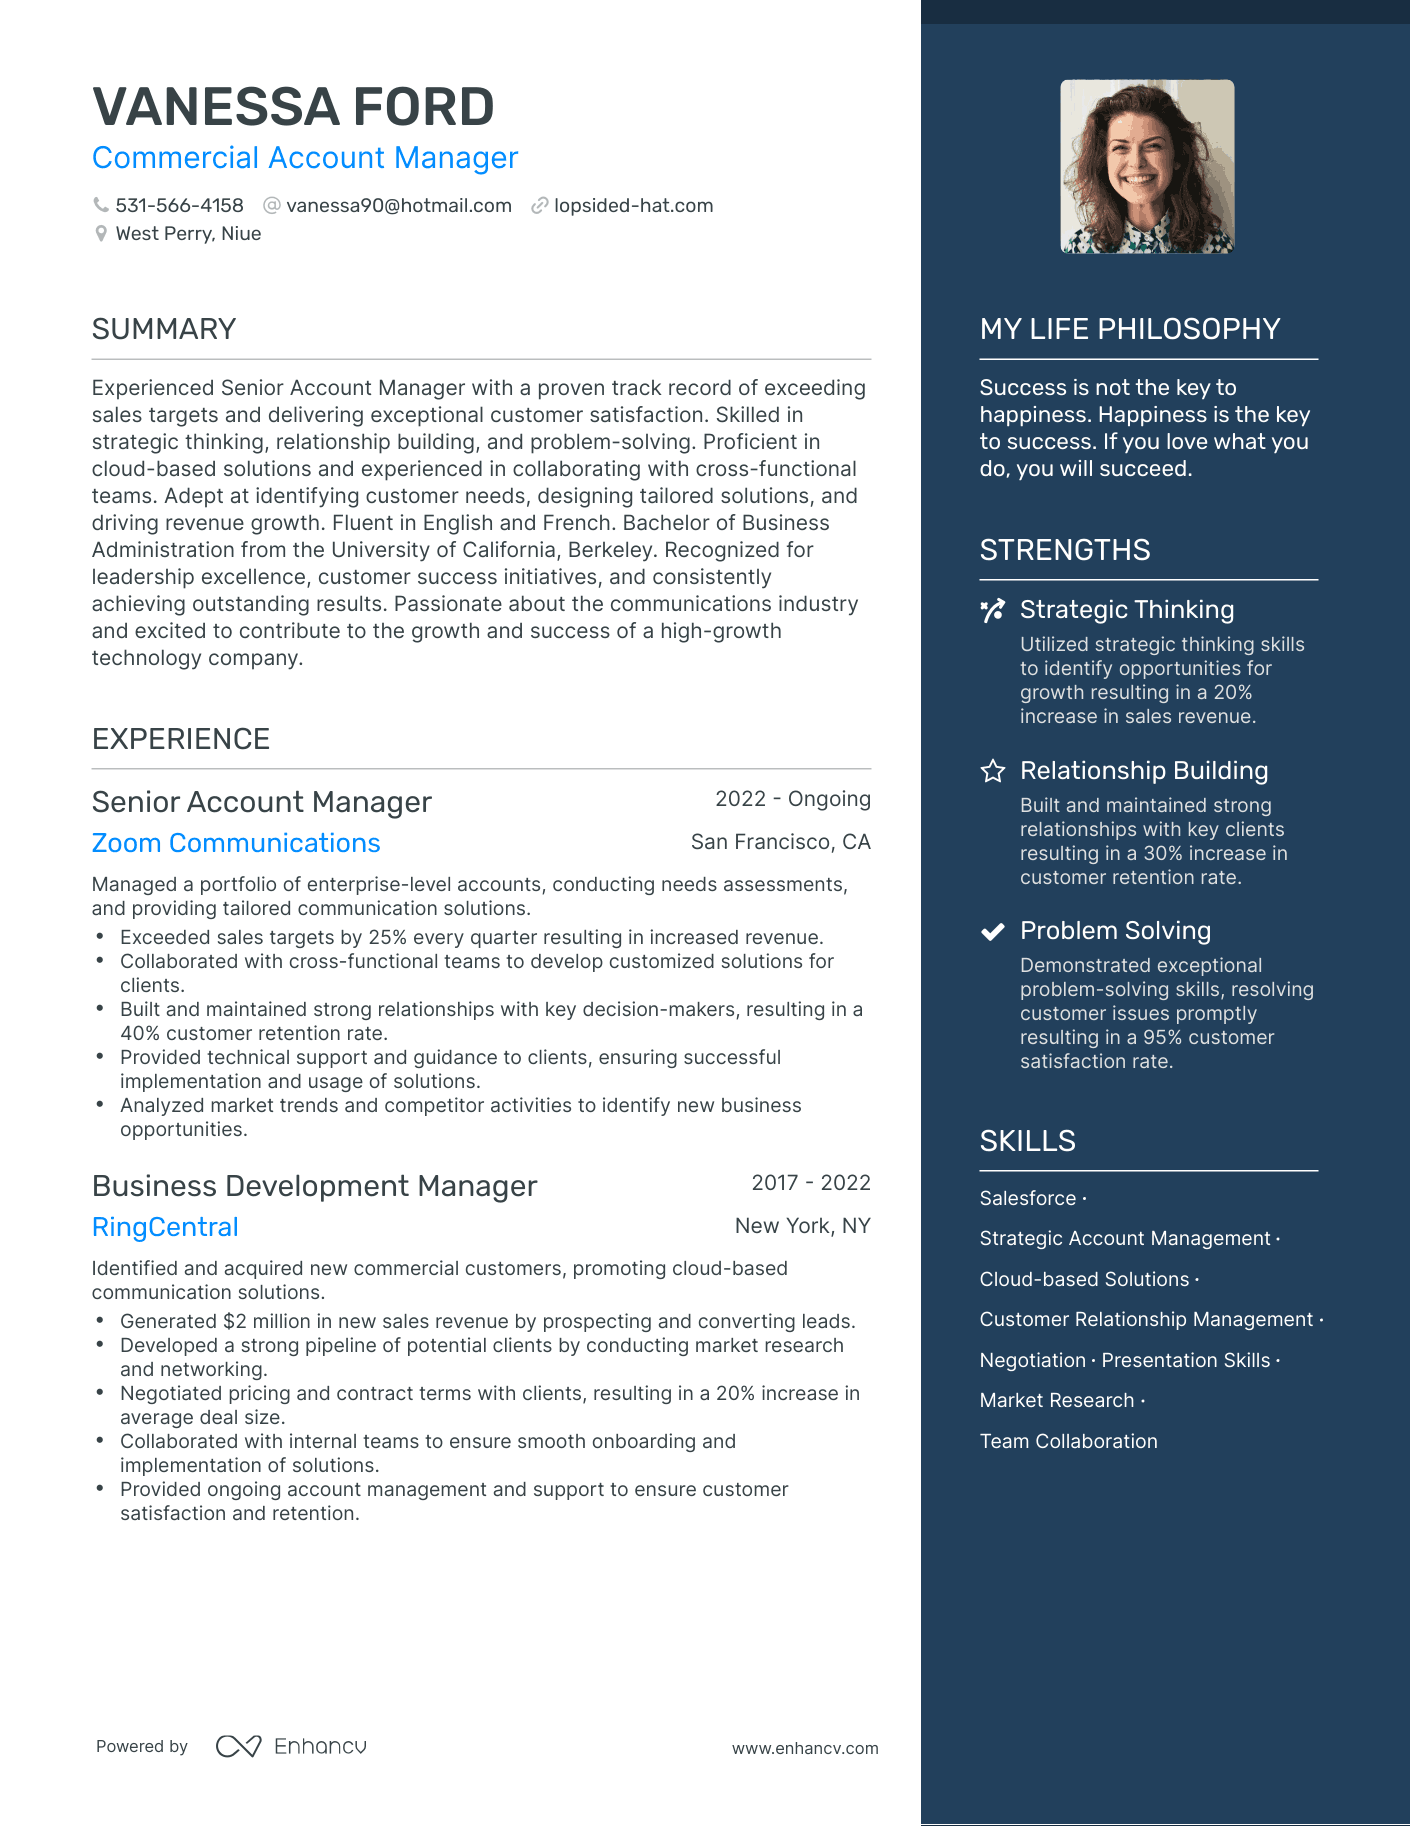 Commercial Account Manager resume example